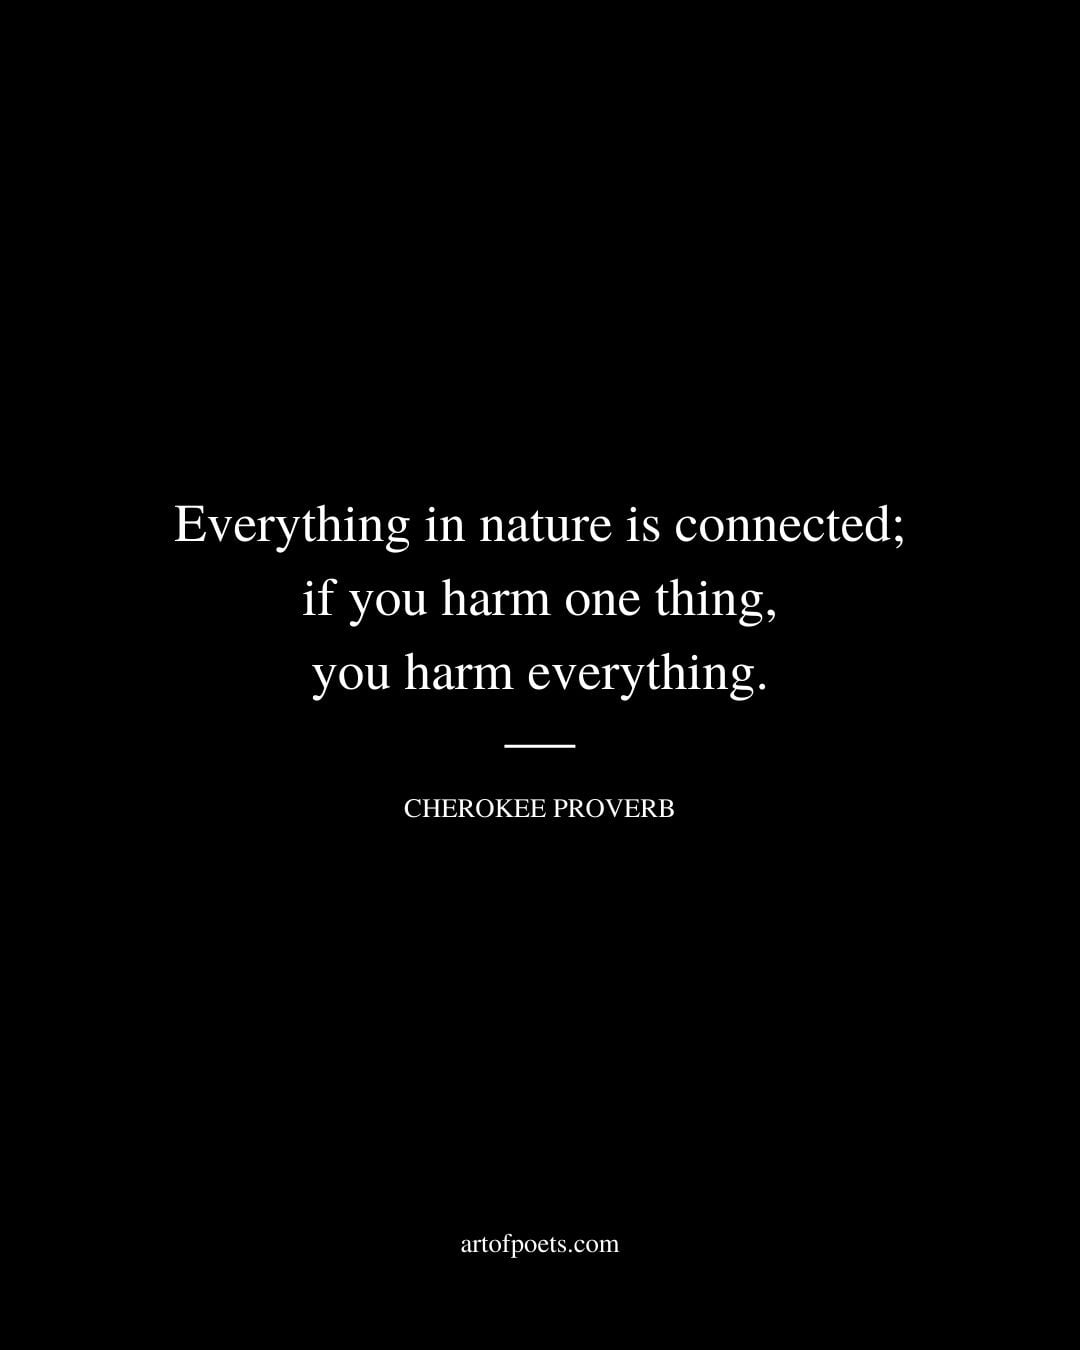 Everything in nature is connected if you harm one thing you harm everything